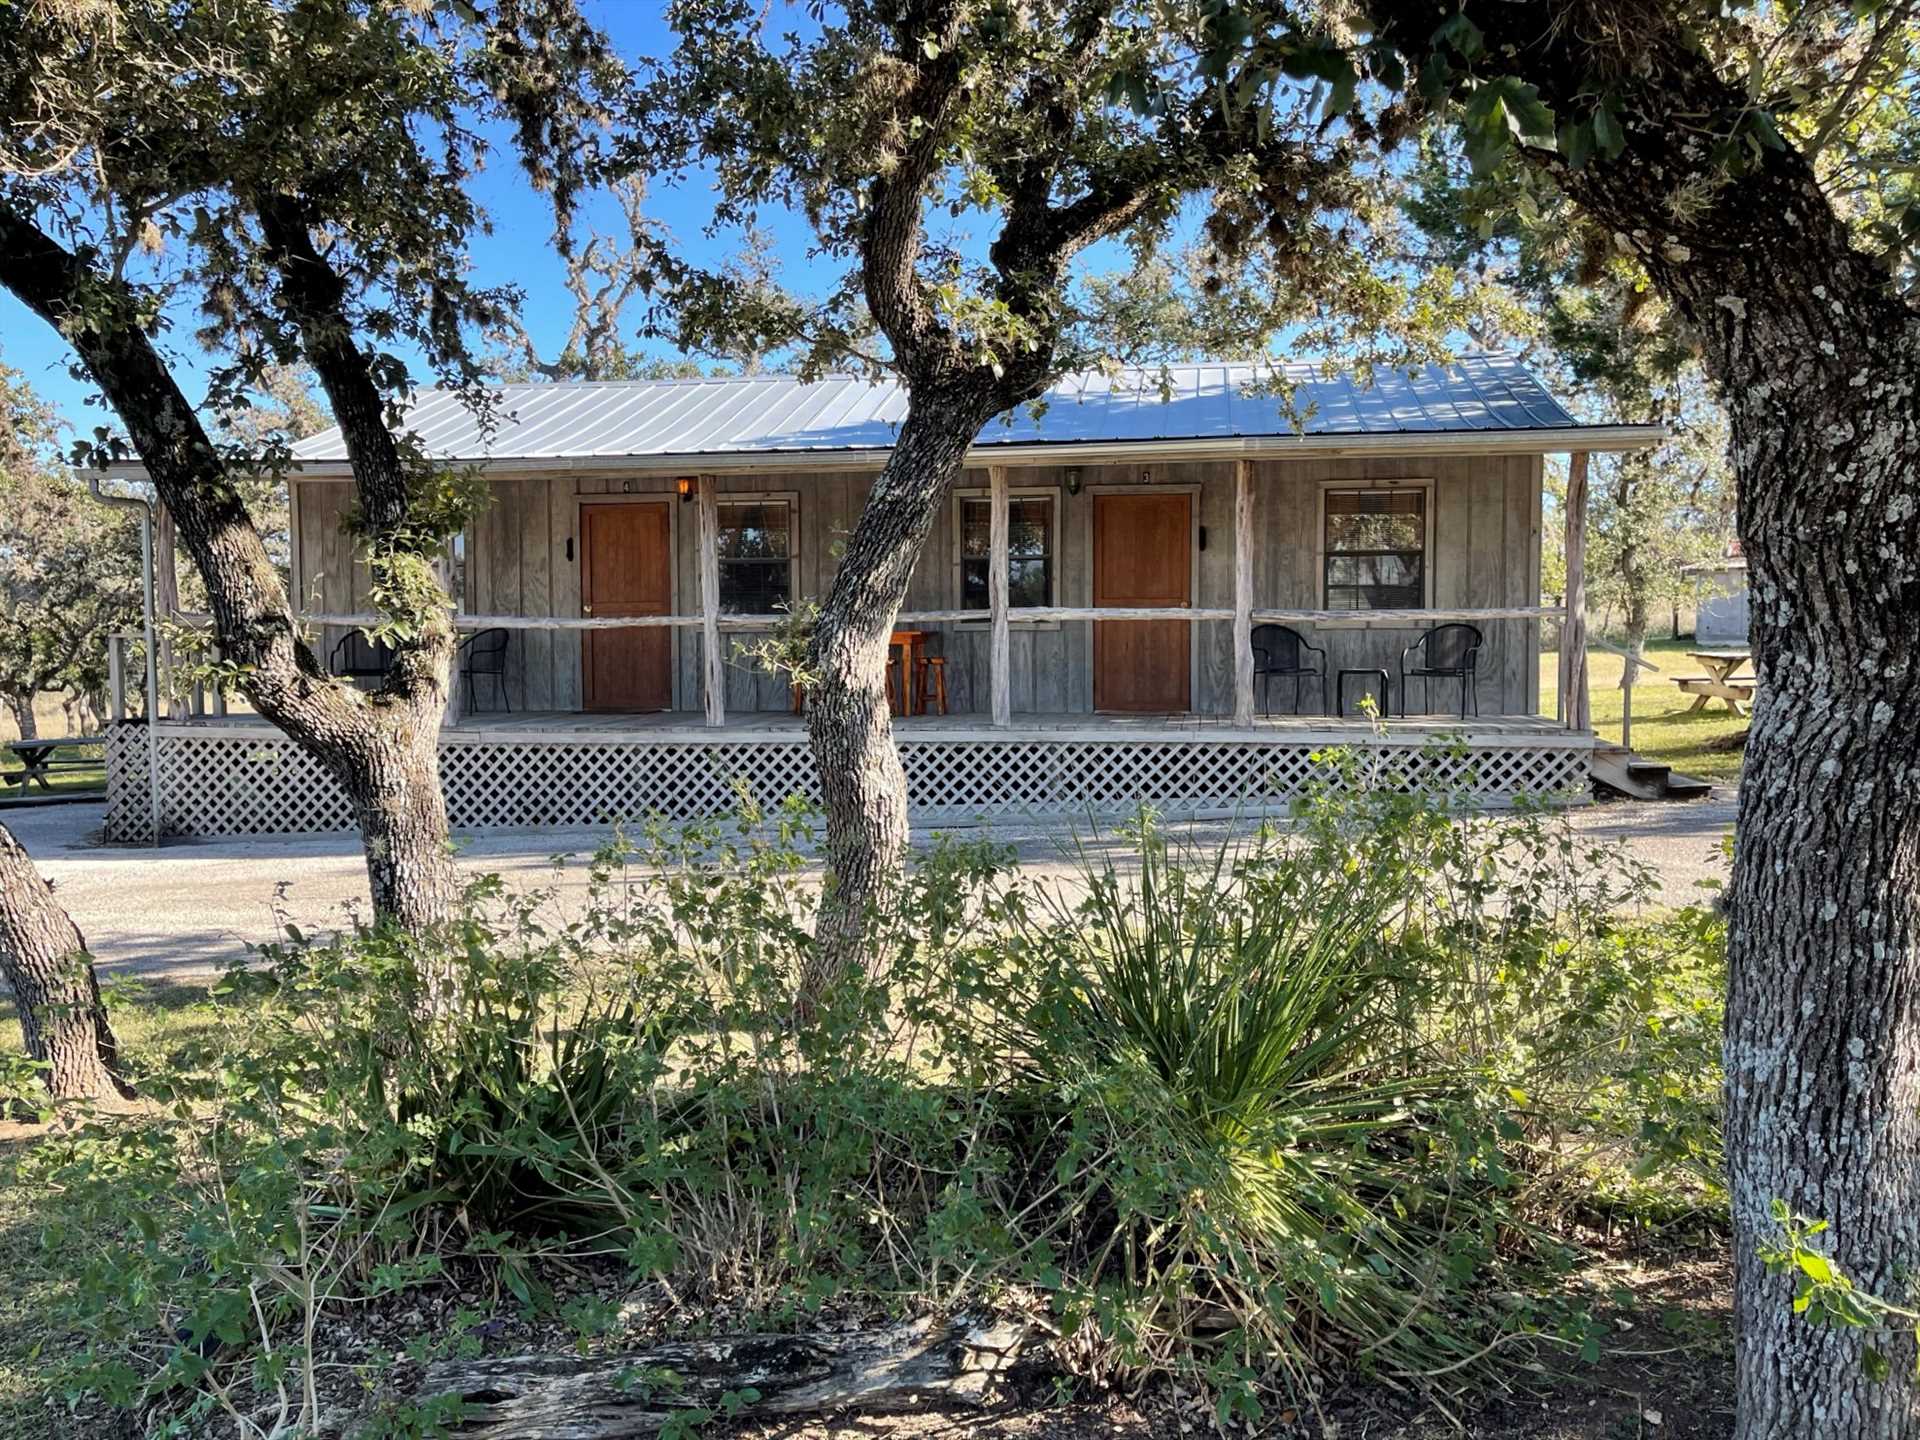                                                 This used to be a functioning Hill Country ranch, but now it's your home away from home for a peaceful and refreshing getaway.